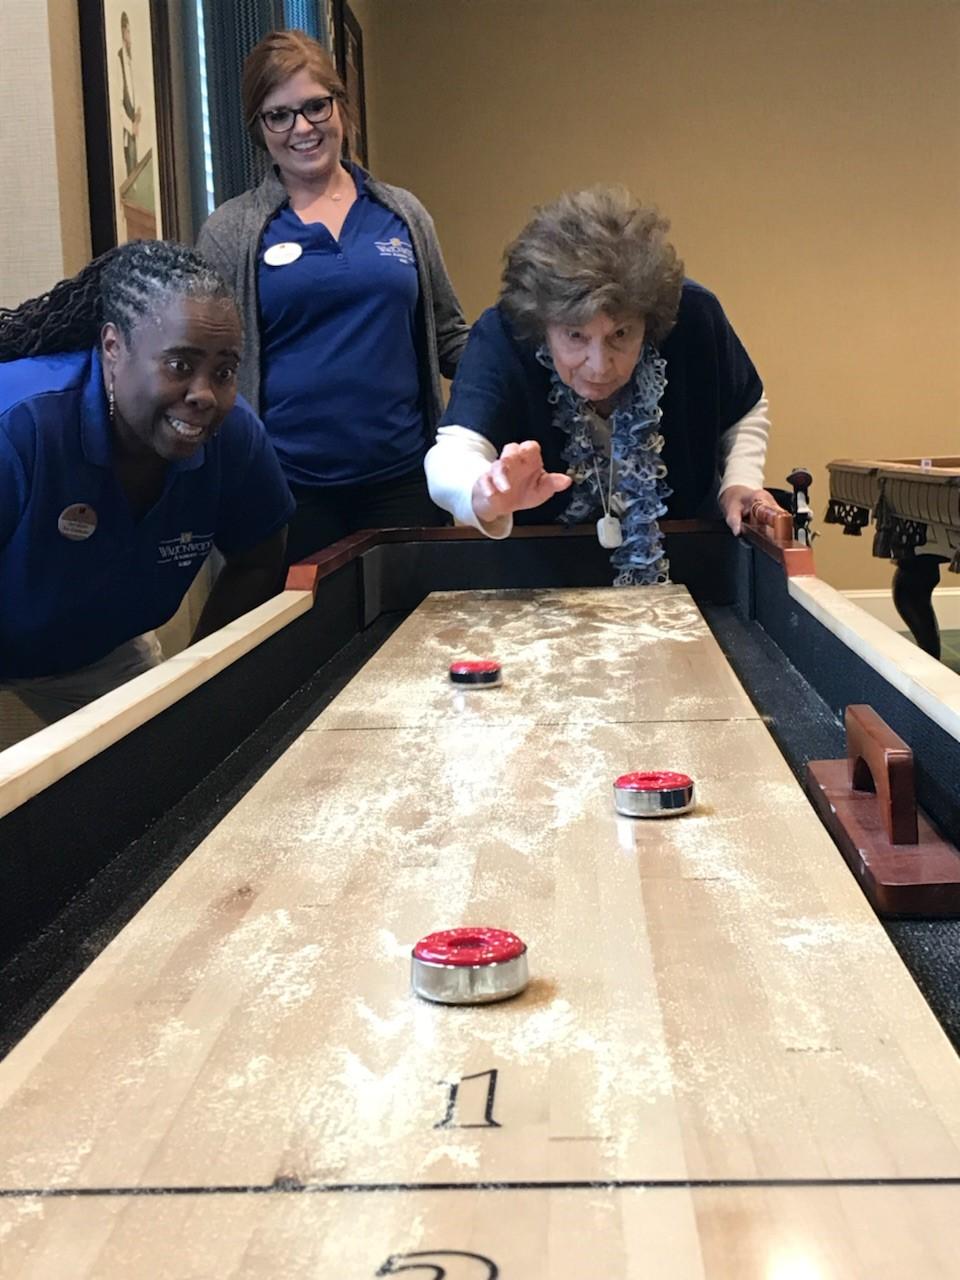 Fun with residents!